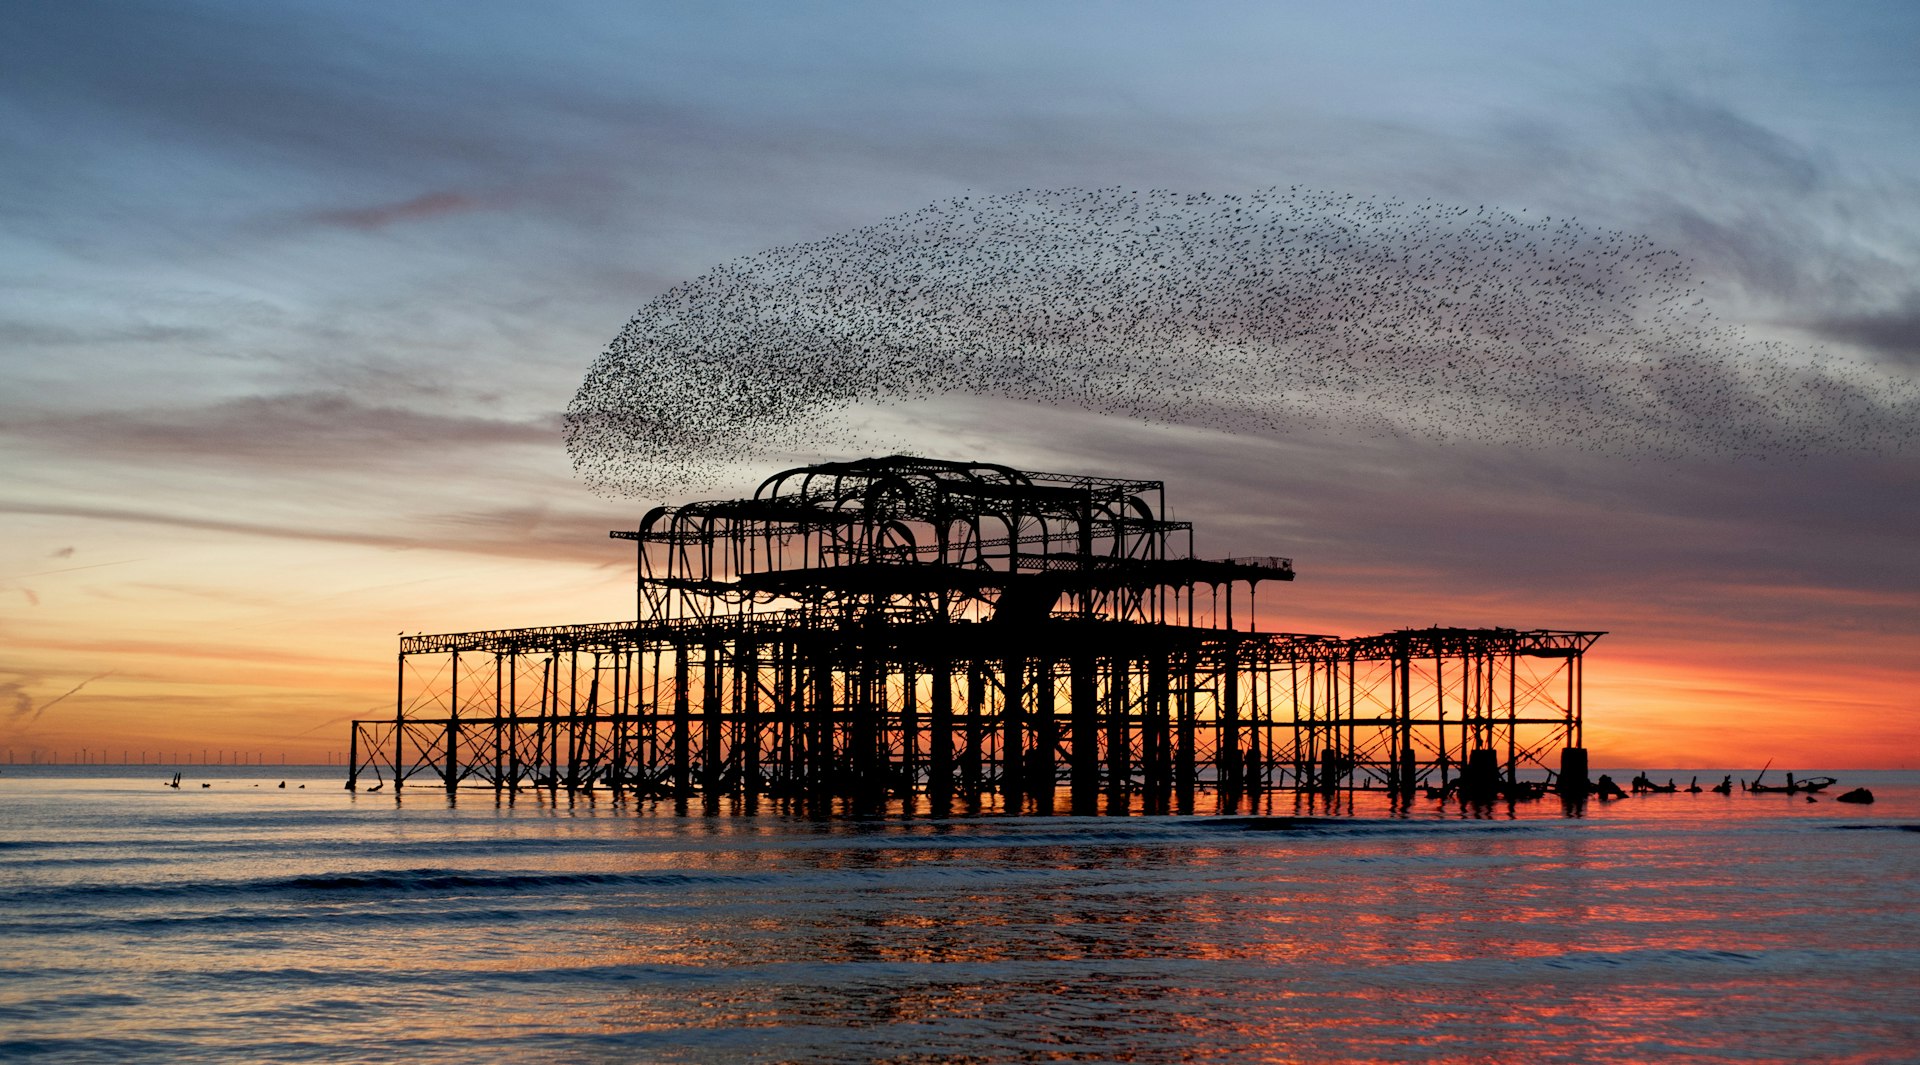 Murmuration (collective fluid movement of a flock of starlings) over the ruins of Brighton and Hove's West Pier during sunset.